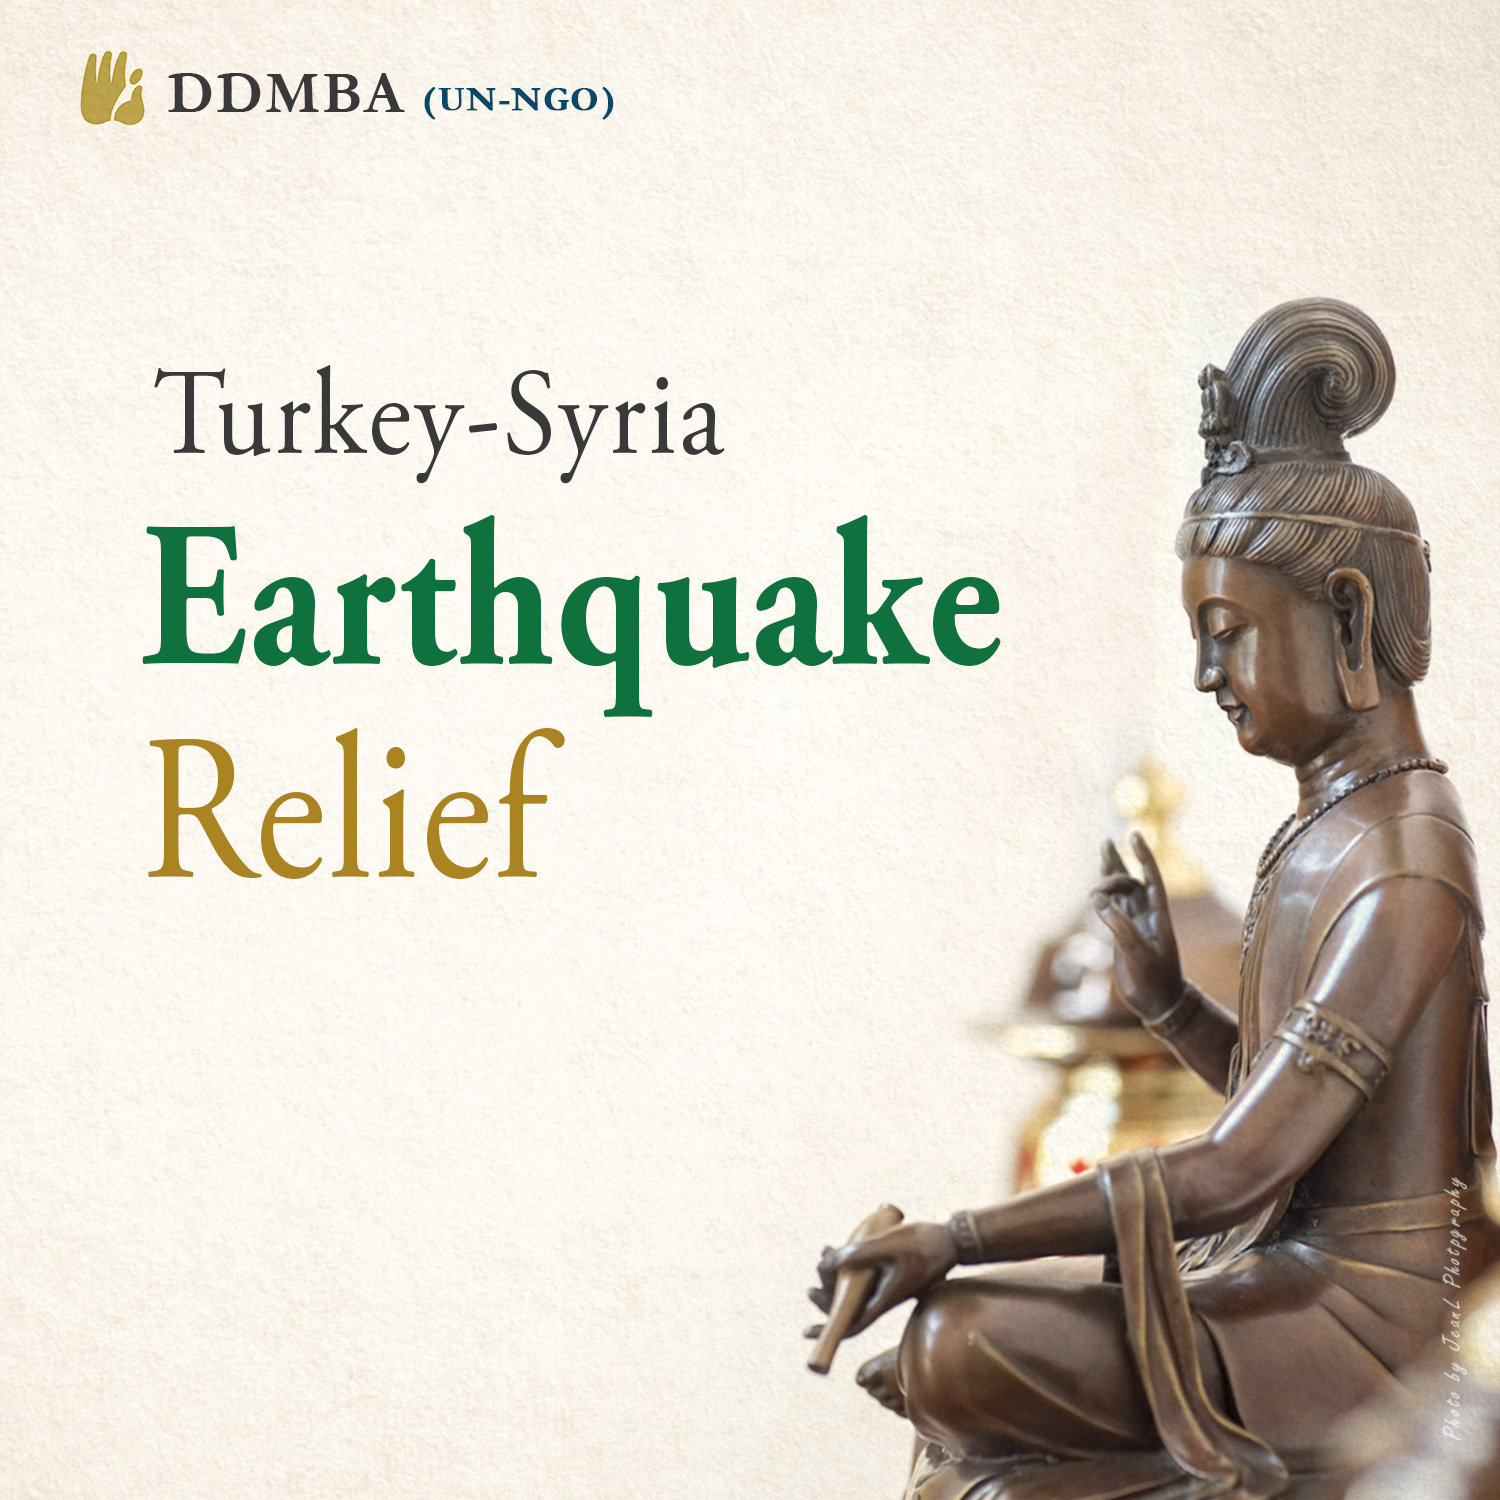 DDMBA TURKEY SYRIA EARTHQUAKE Relief Project